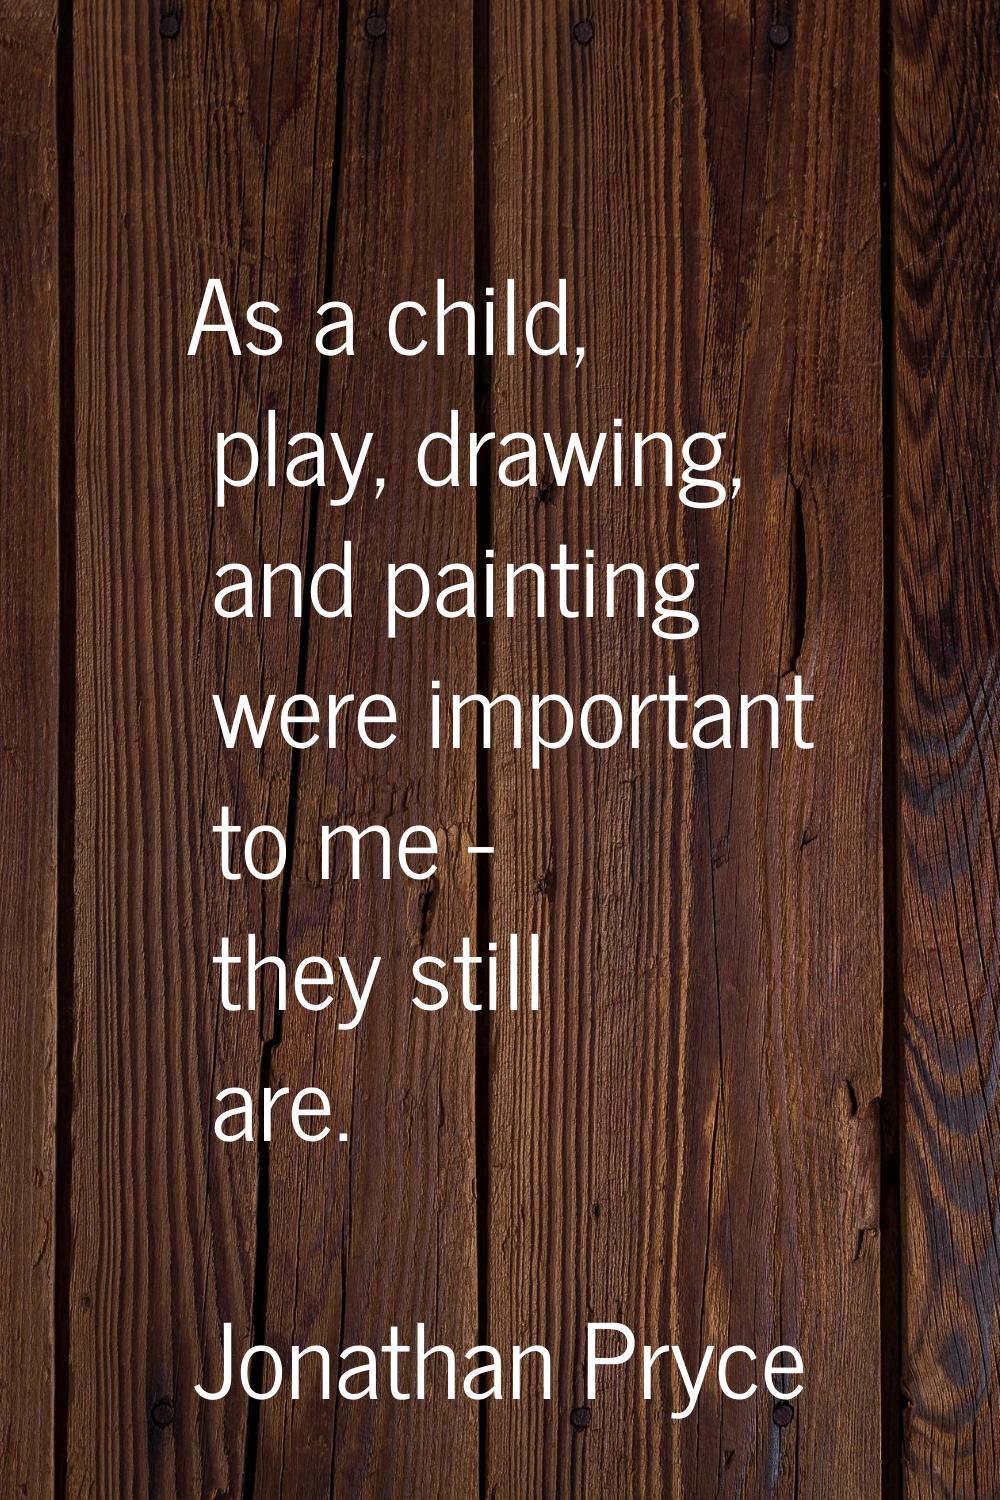 As a child, play, drawing, and painting were important to me - they still are.